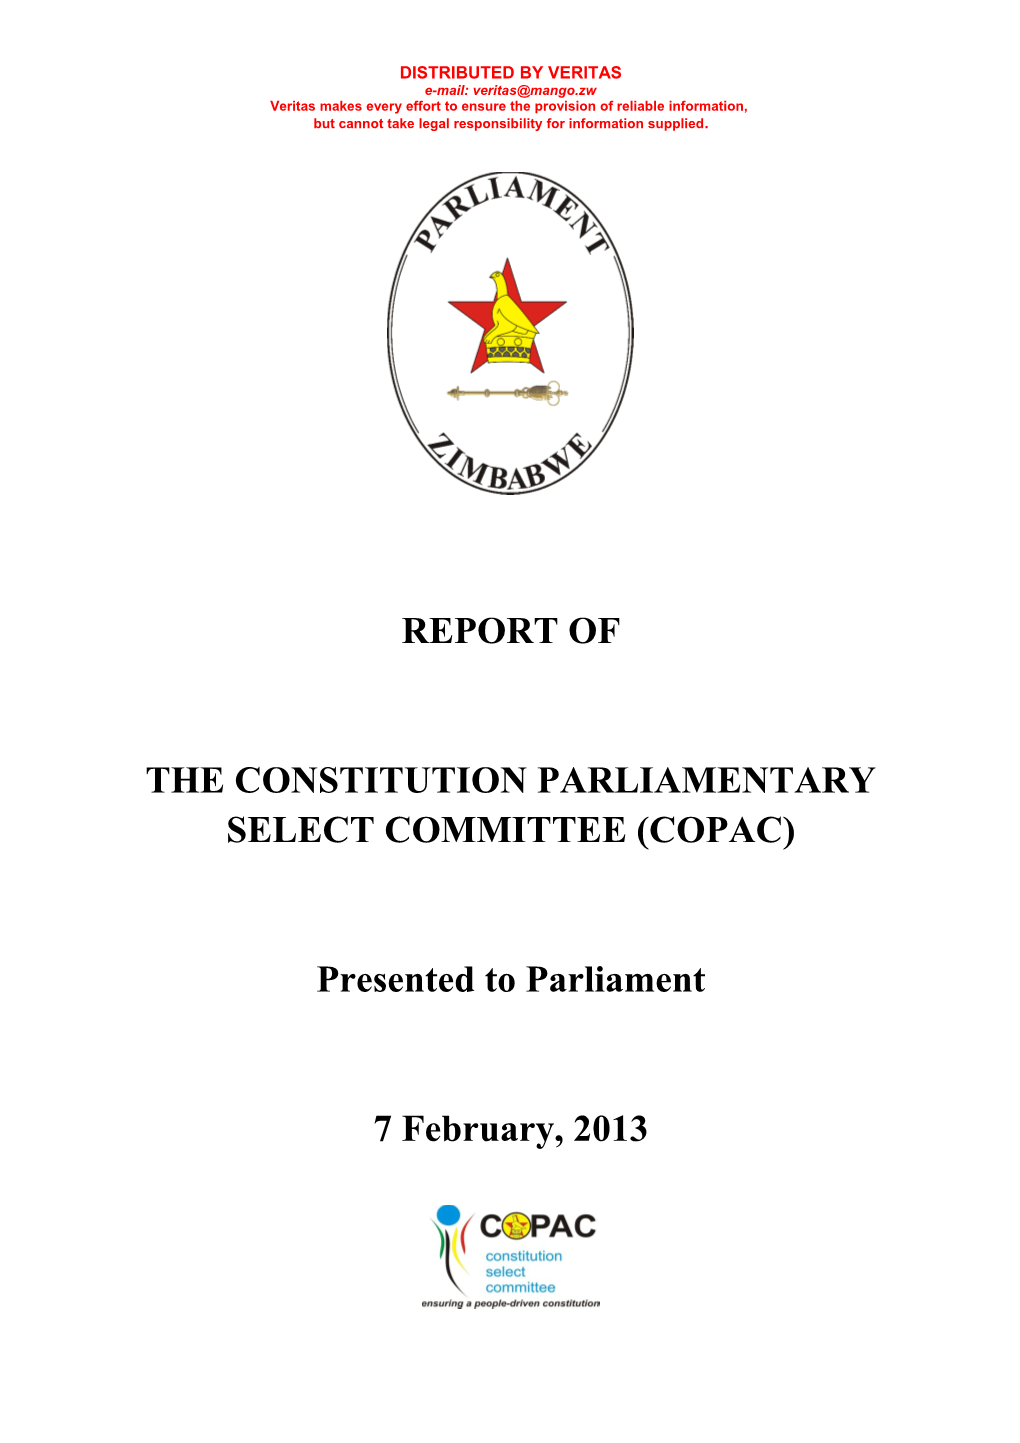 Final Report of COPAC to Parliament - Feb 2013